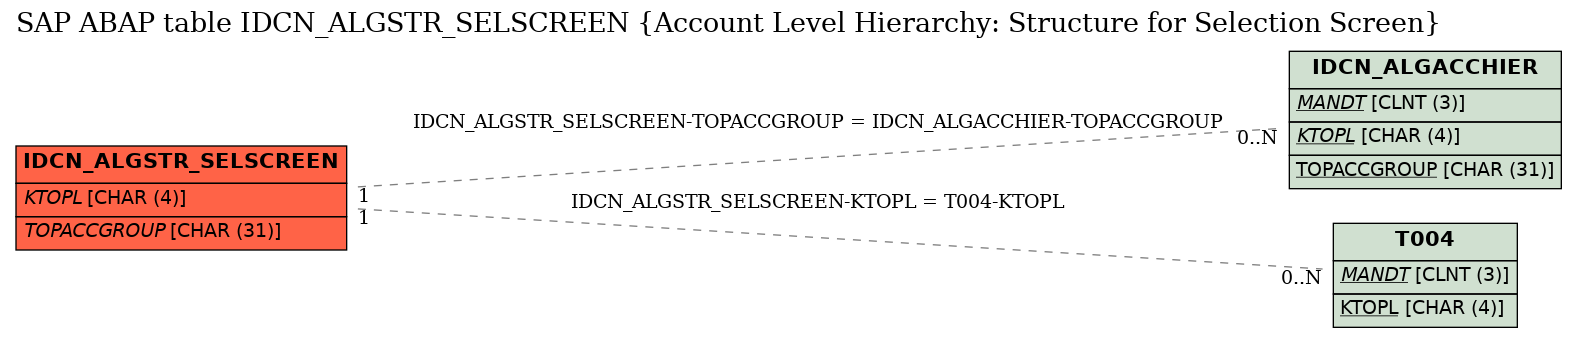 E-R Diagram for table IDCN_ALGSTR_SELSCREEN (Account Level Hierarchy: Structure for Selection Screen)